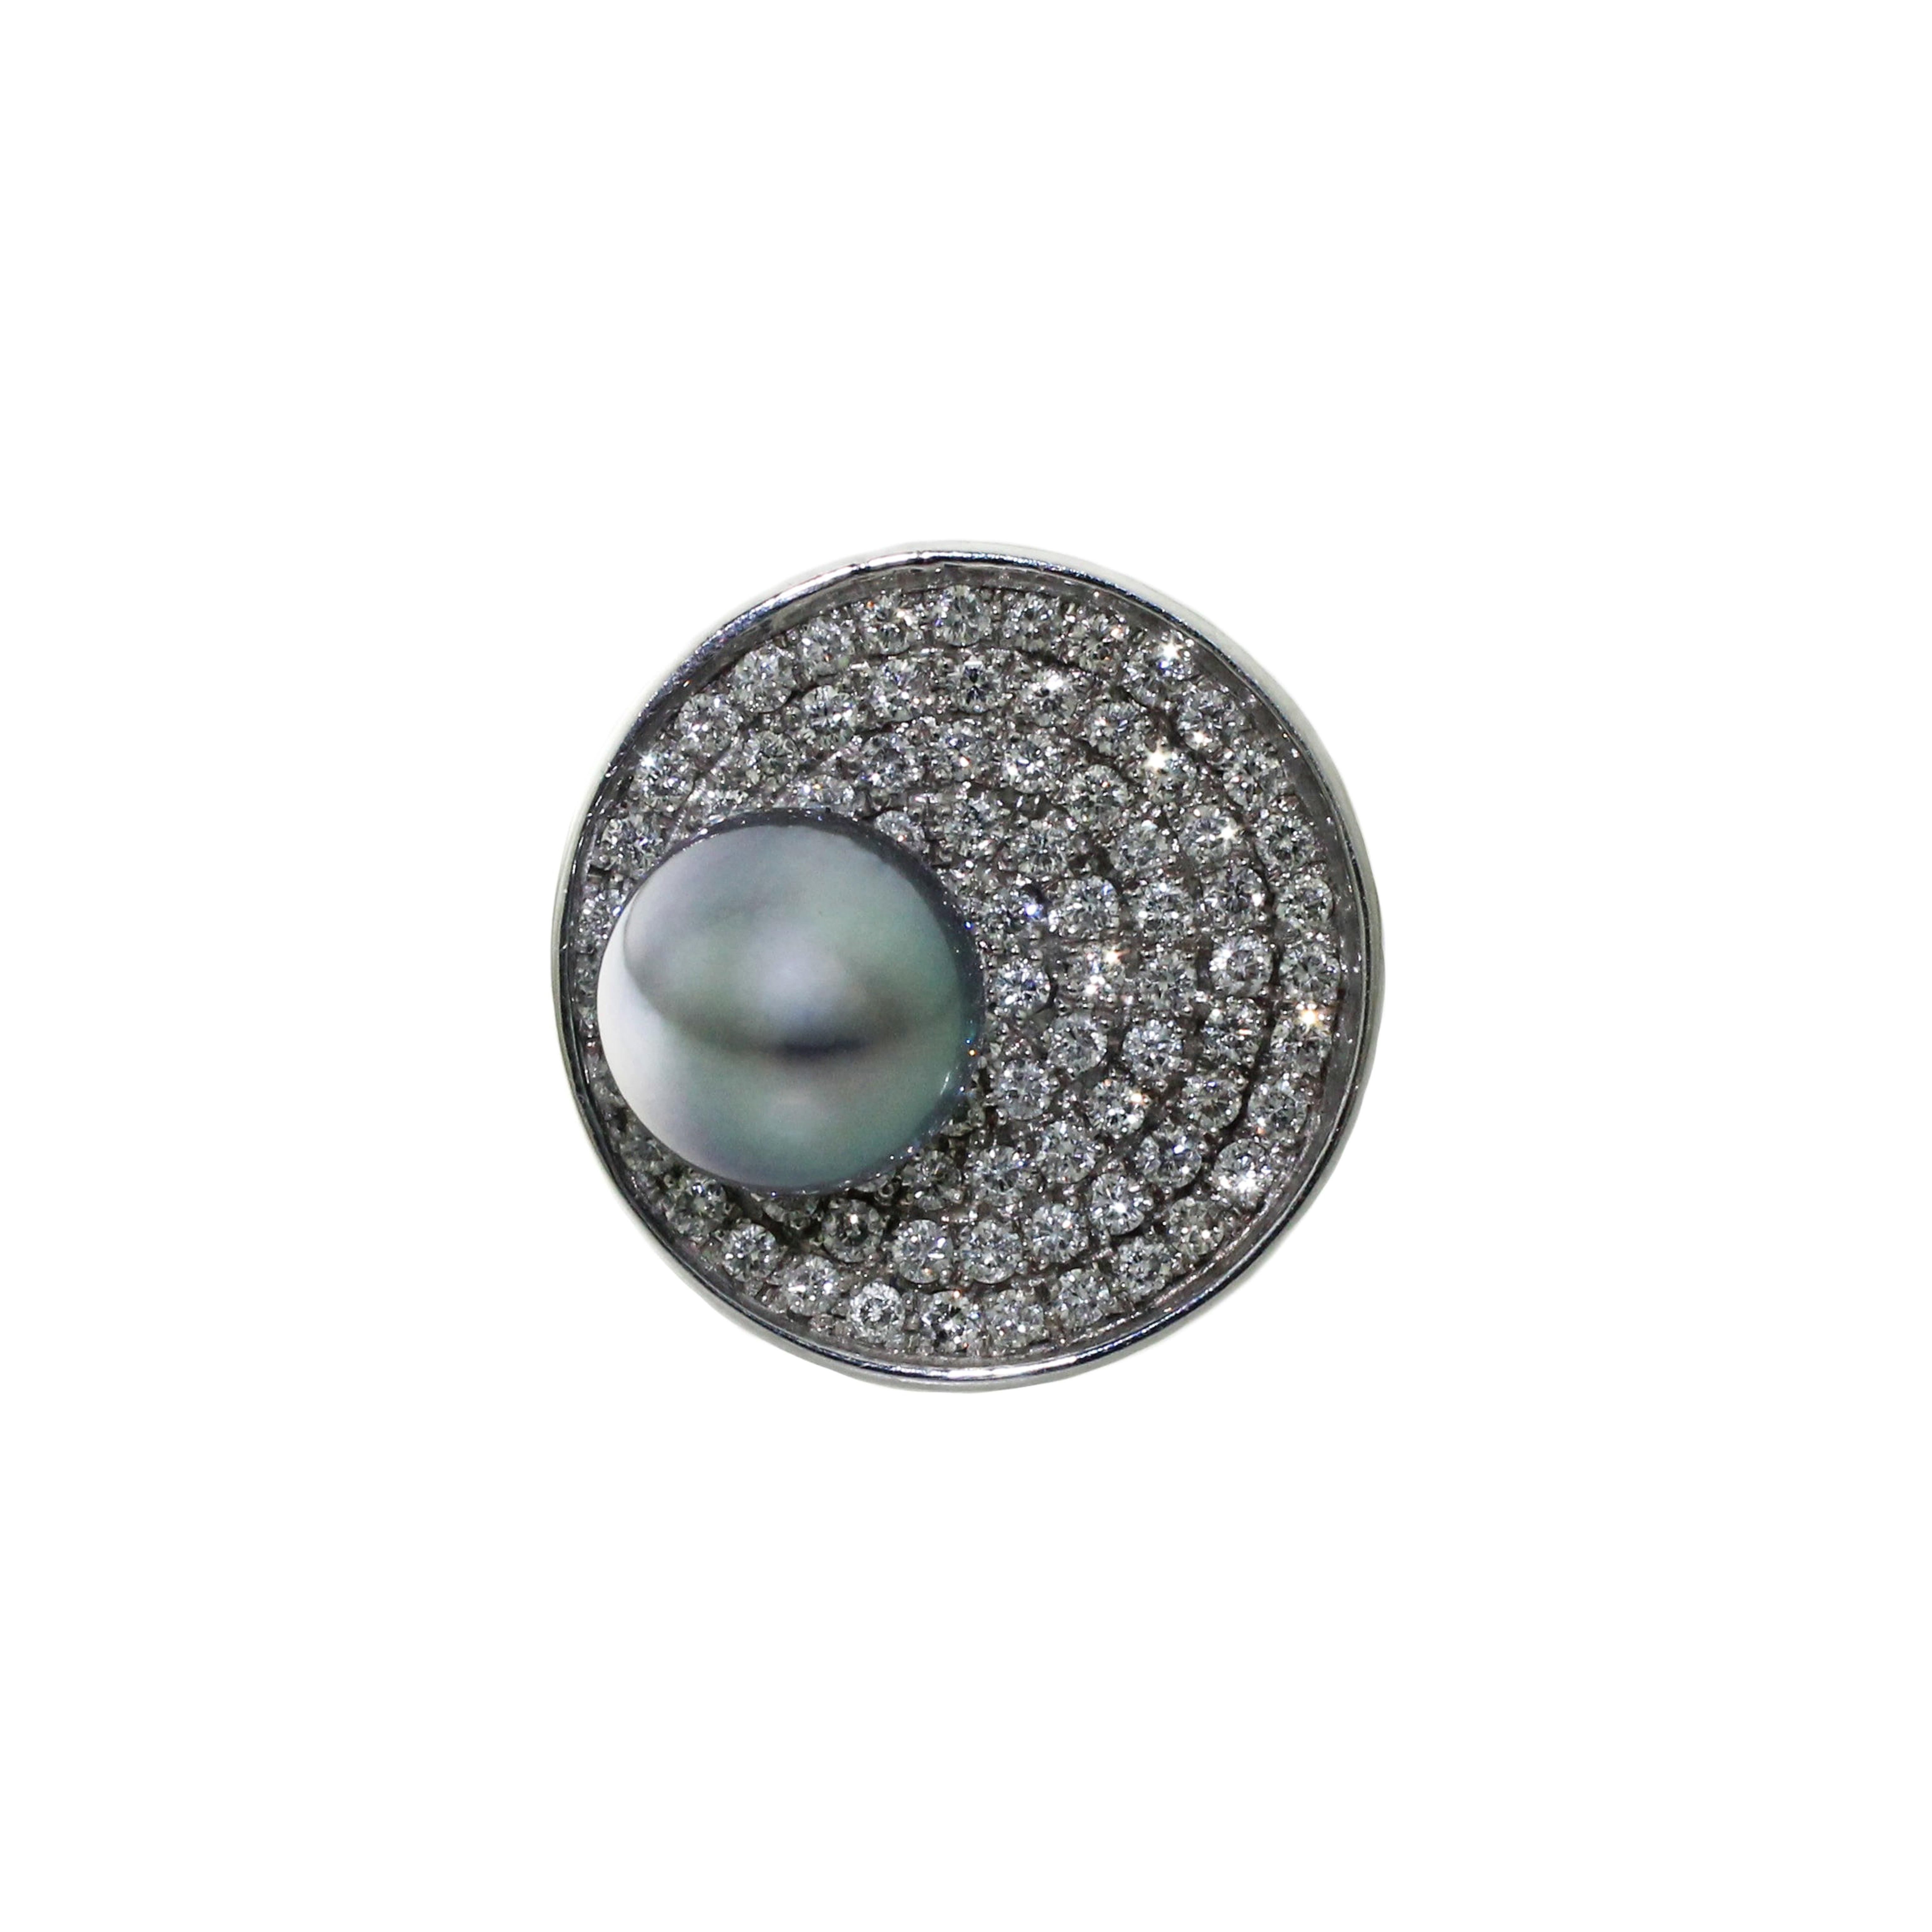 This contemporary pave diamond ring adorned with a flawless 9 mm Tahitian pearl makes the perfect statement ring. If you want to upgrade your look by adding a design piece or add some light to your hands this is the right ring. Its pave diamonds